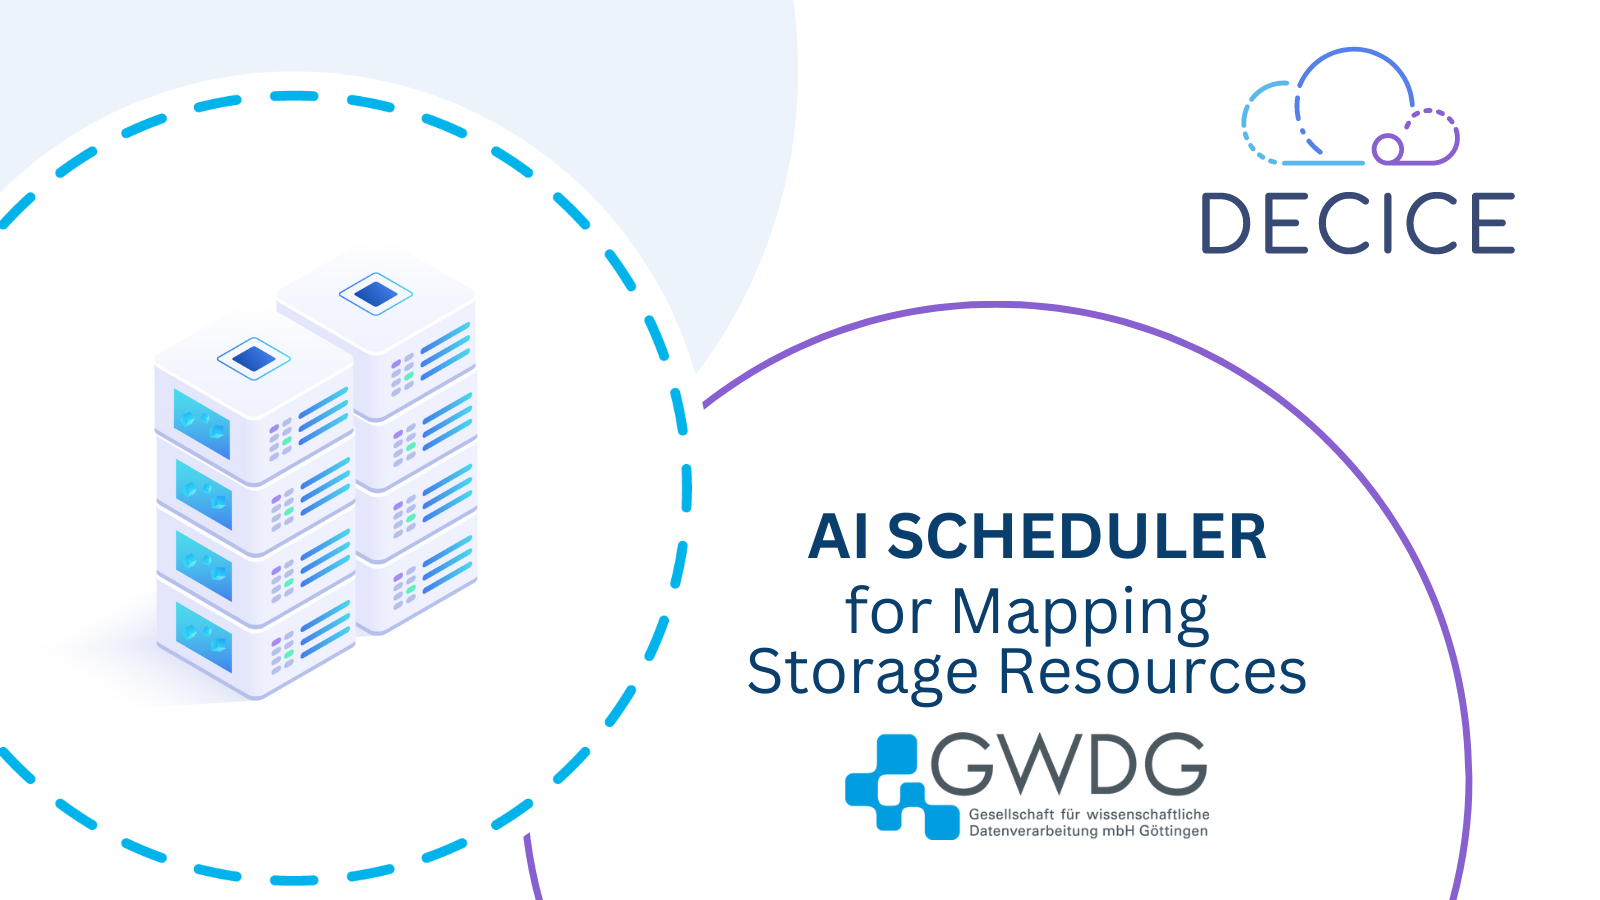 AI Scheduler for Mapping Storage Resources, GWDG and DECICE Logo, Visualisation of a server